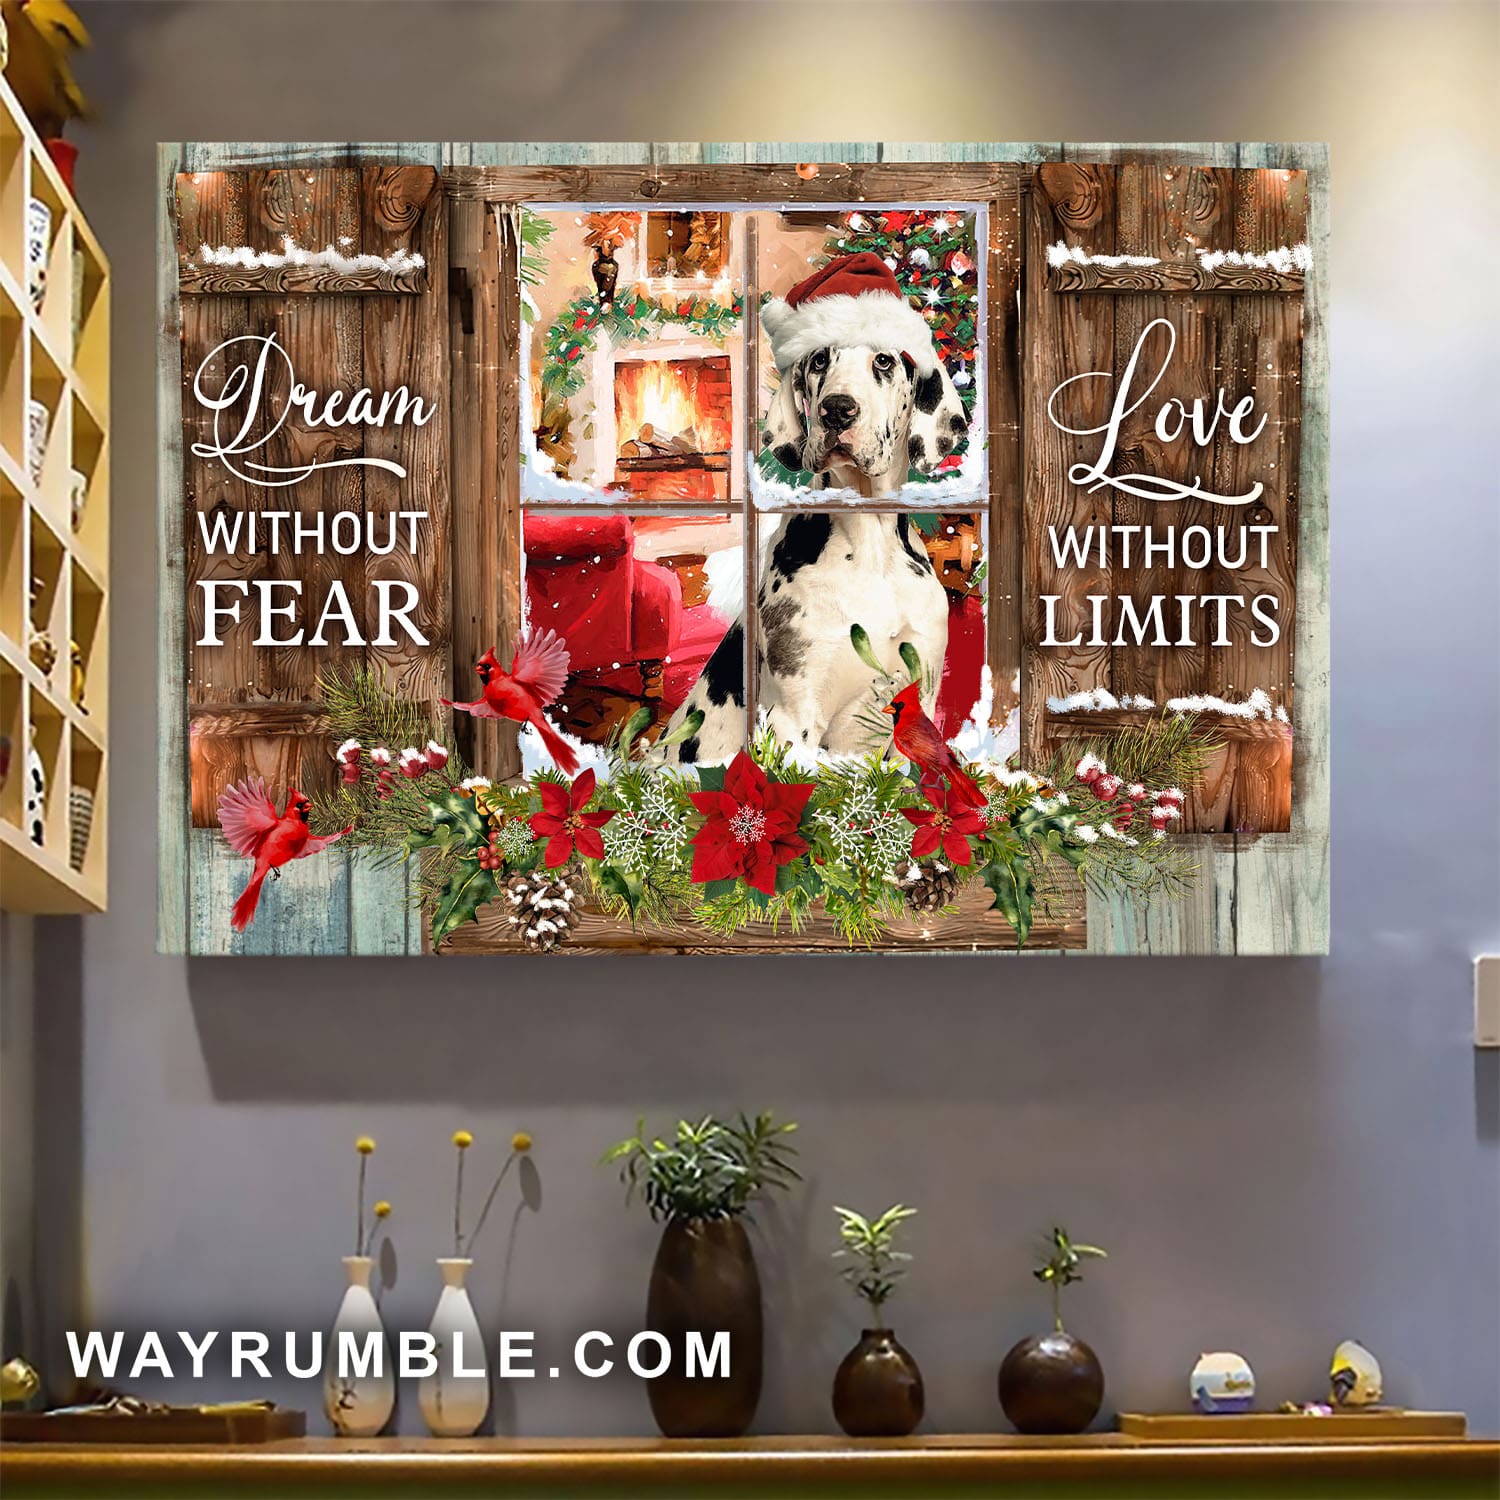 Great Dane, Through the window, Christmas, Dream without fear, love without limits - Dog Landscape Canvas Prints , Wall Art